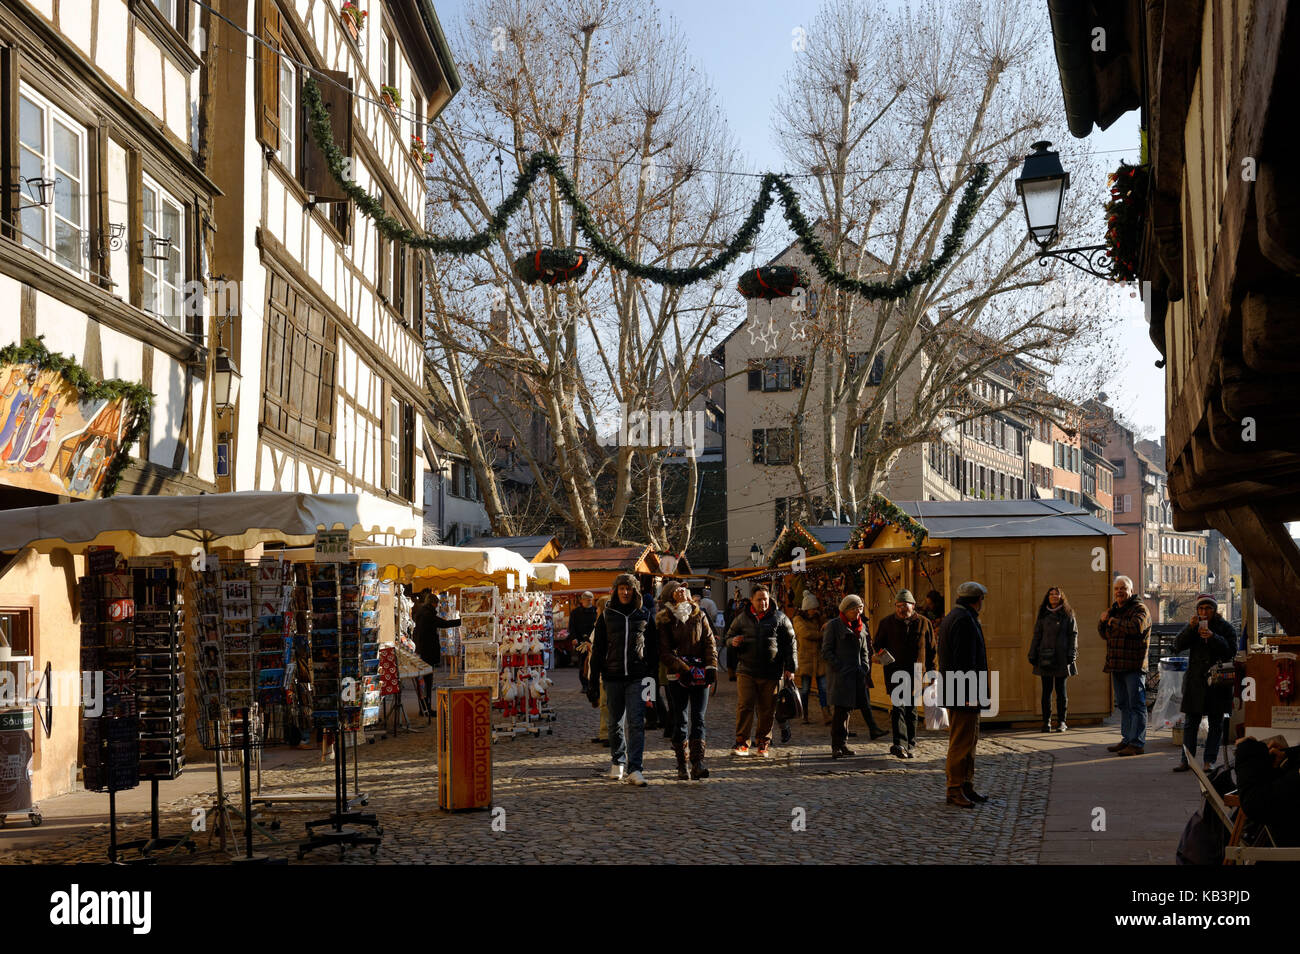 France, Bas Rhin, Strasbourg, old town listed as World Heritage by UNESCO, Christmas at the Petite France district, Christmas market on place Benjamin Zix Stock Photo